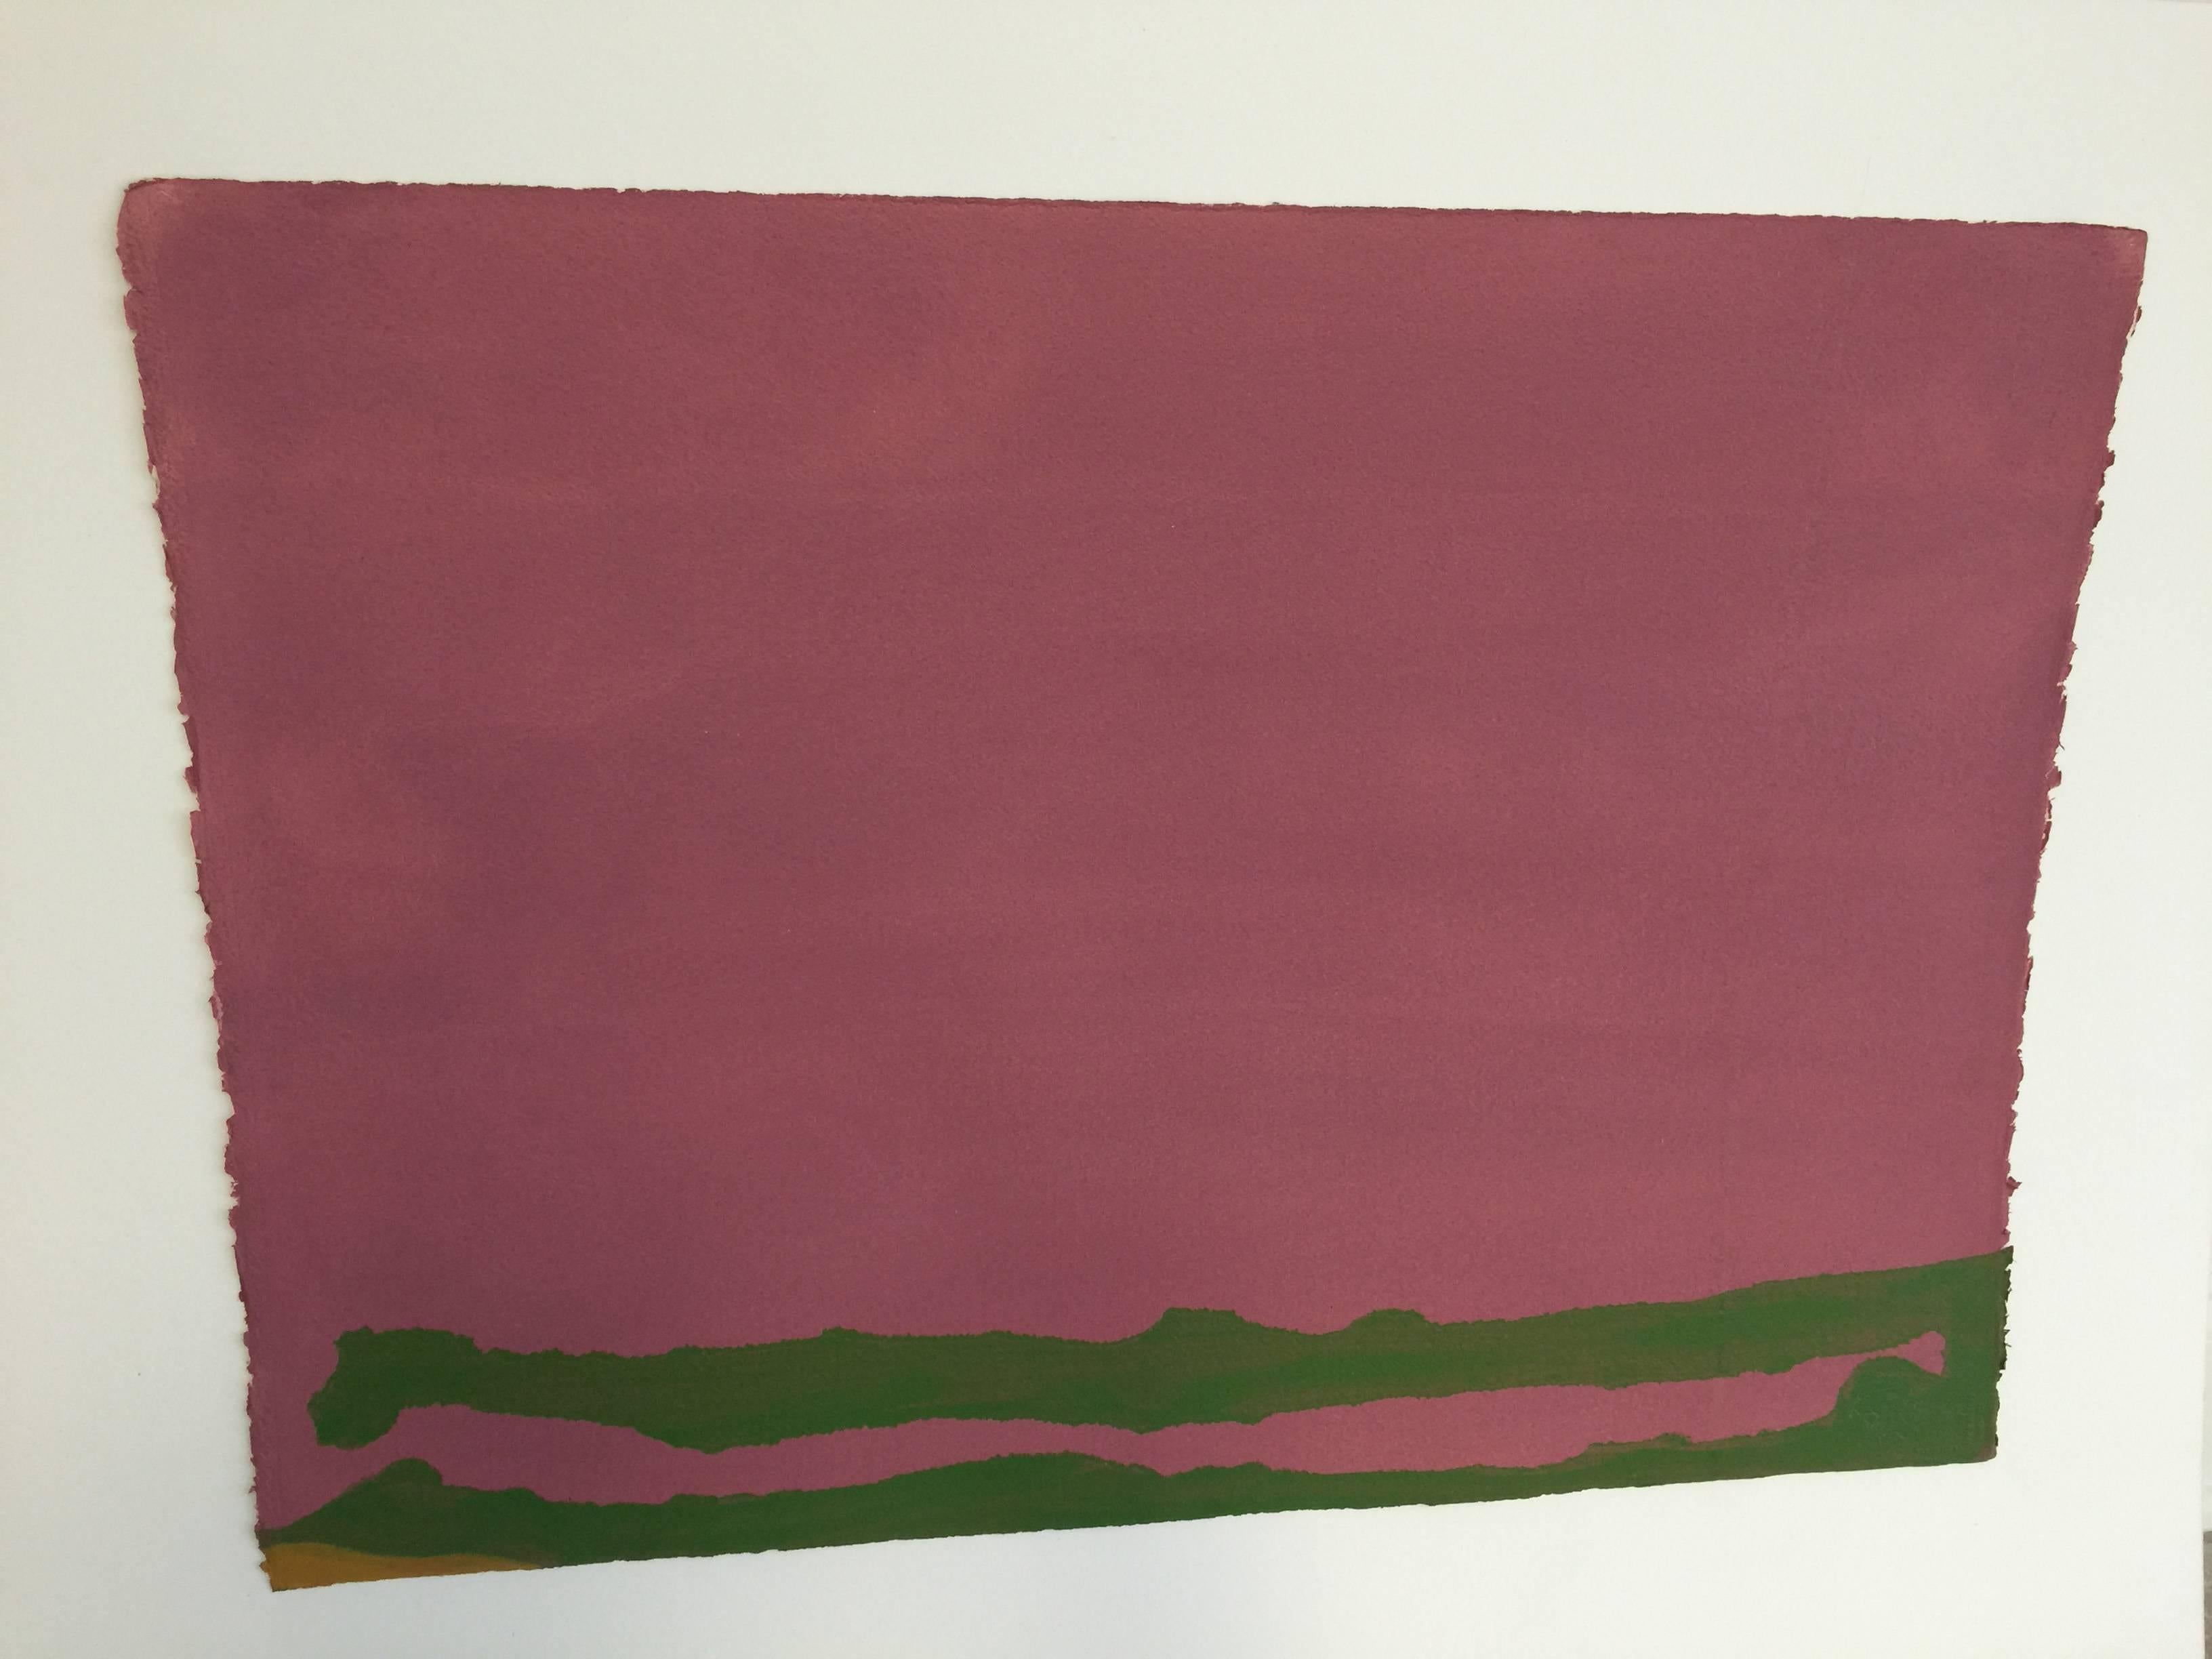 Helen Frankenthaler's purple and green work is an early work, 1970, of a perfect example of the artist's ability to create a beautifully rich work of deep colorful hues. Part of a suite of four pochoir prints, this was produced in the artist's